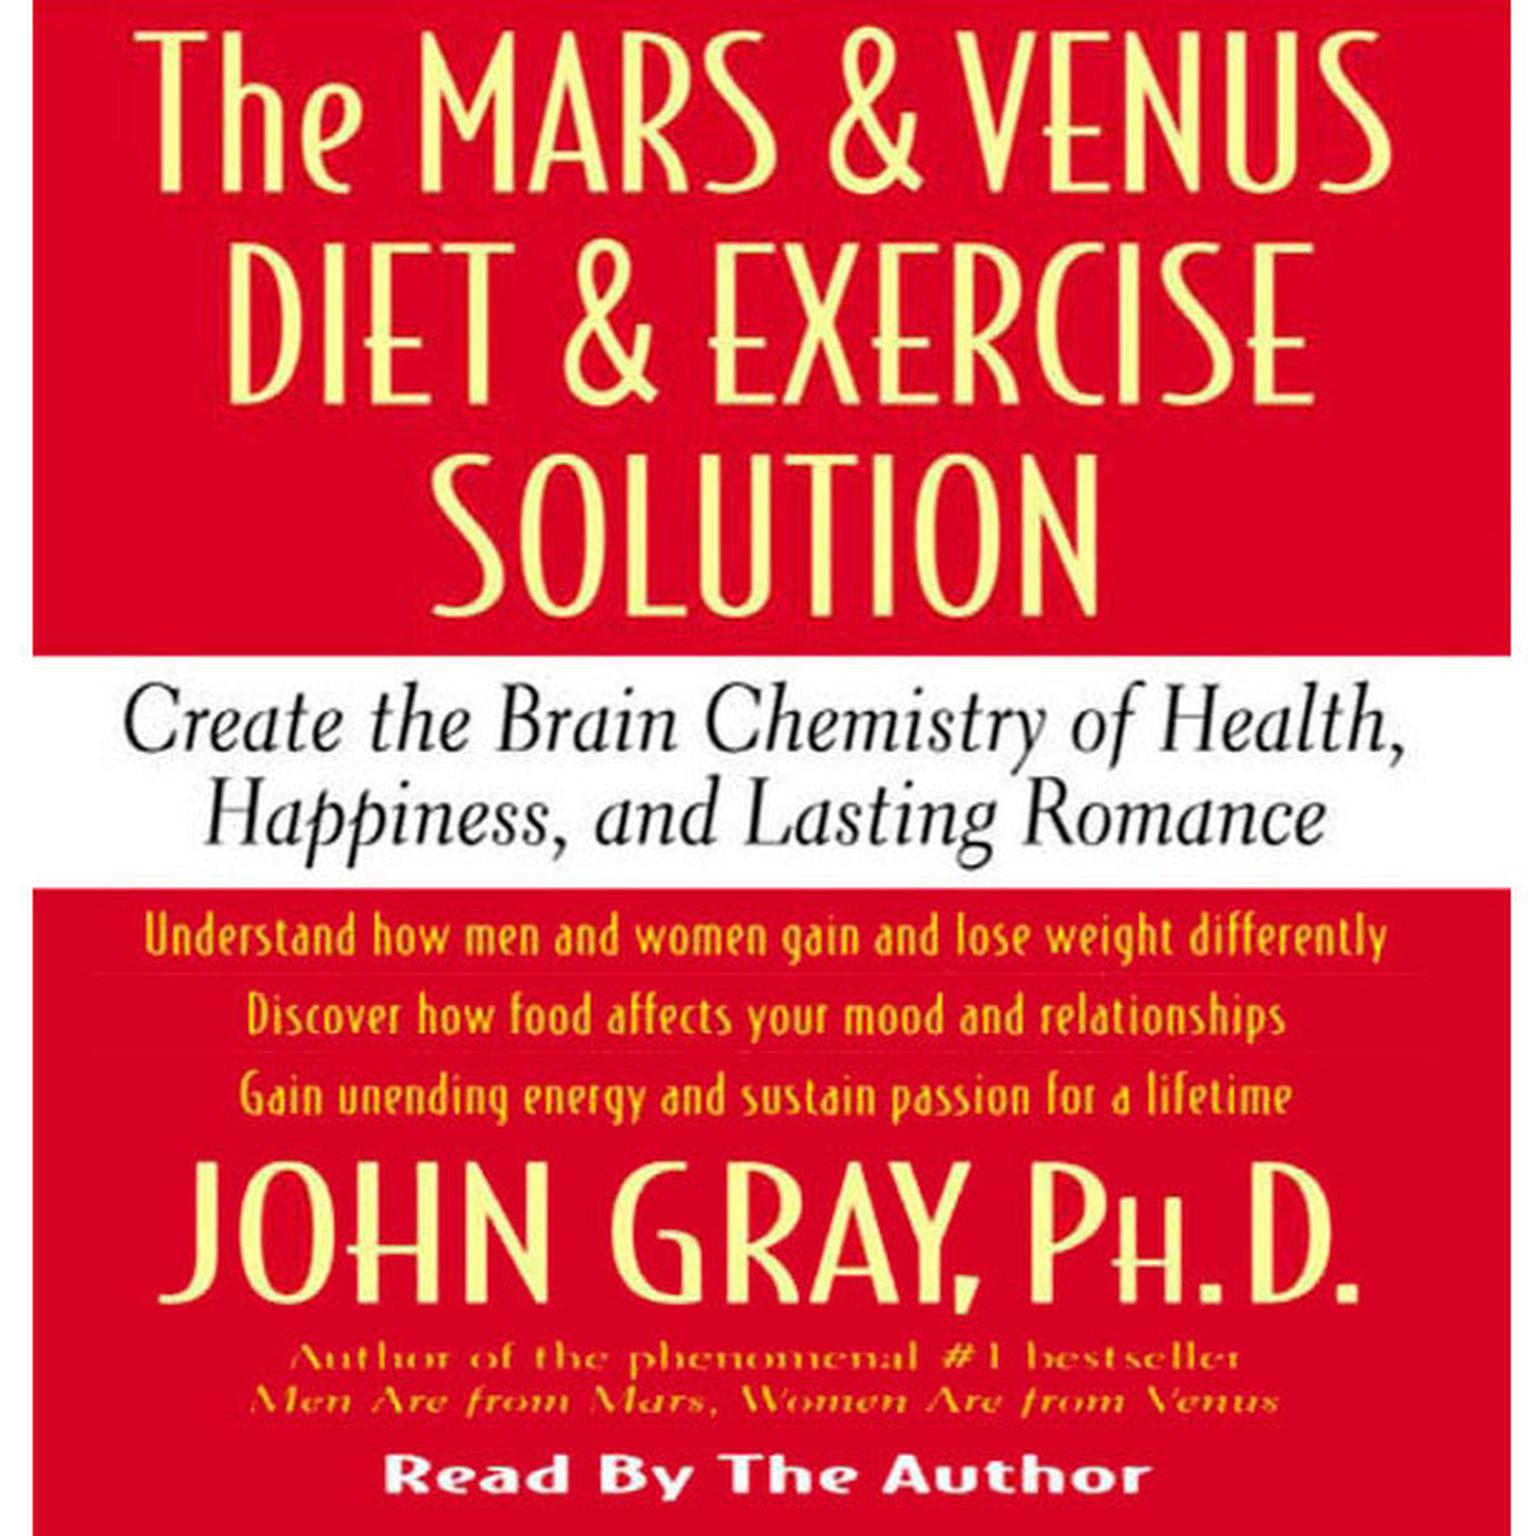 The Mars and Venus Diet and Exercise Solution (Abridged): Create the Brain Chemistry of Health, Happiness, and Lasting Romance Audiobook, by Daniel G. Amen